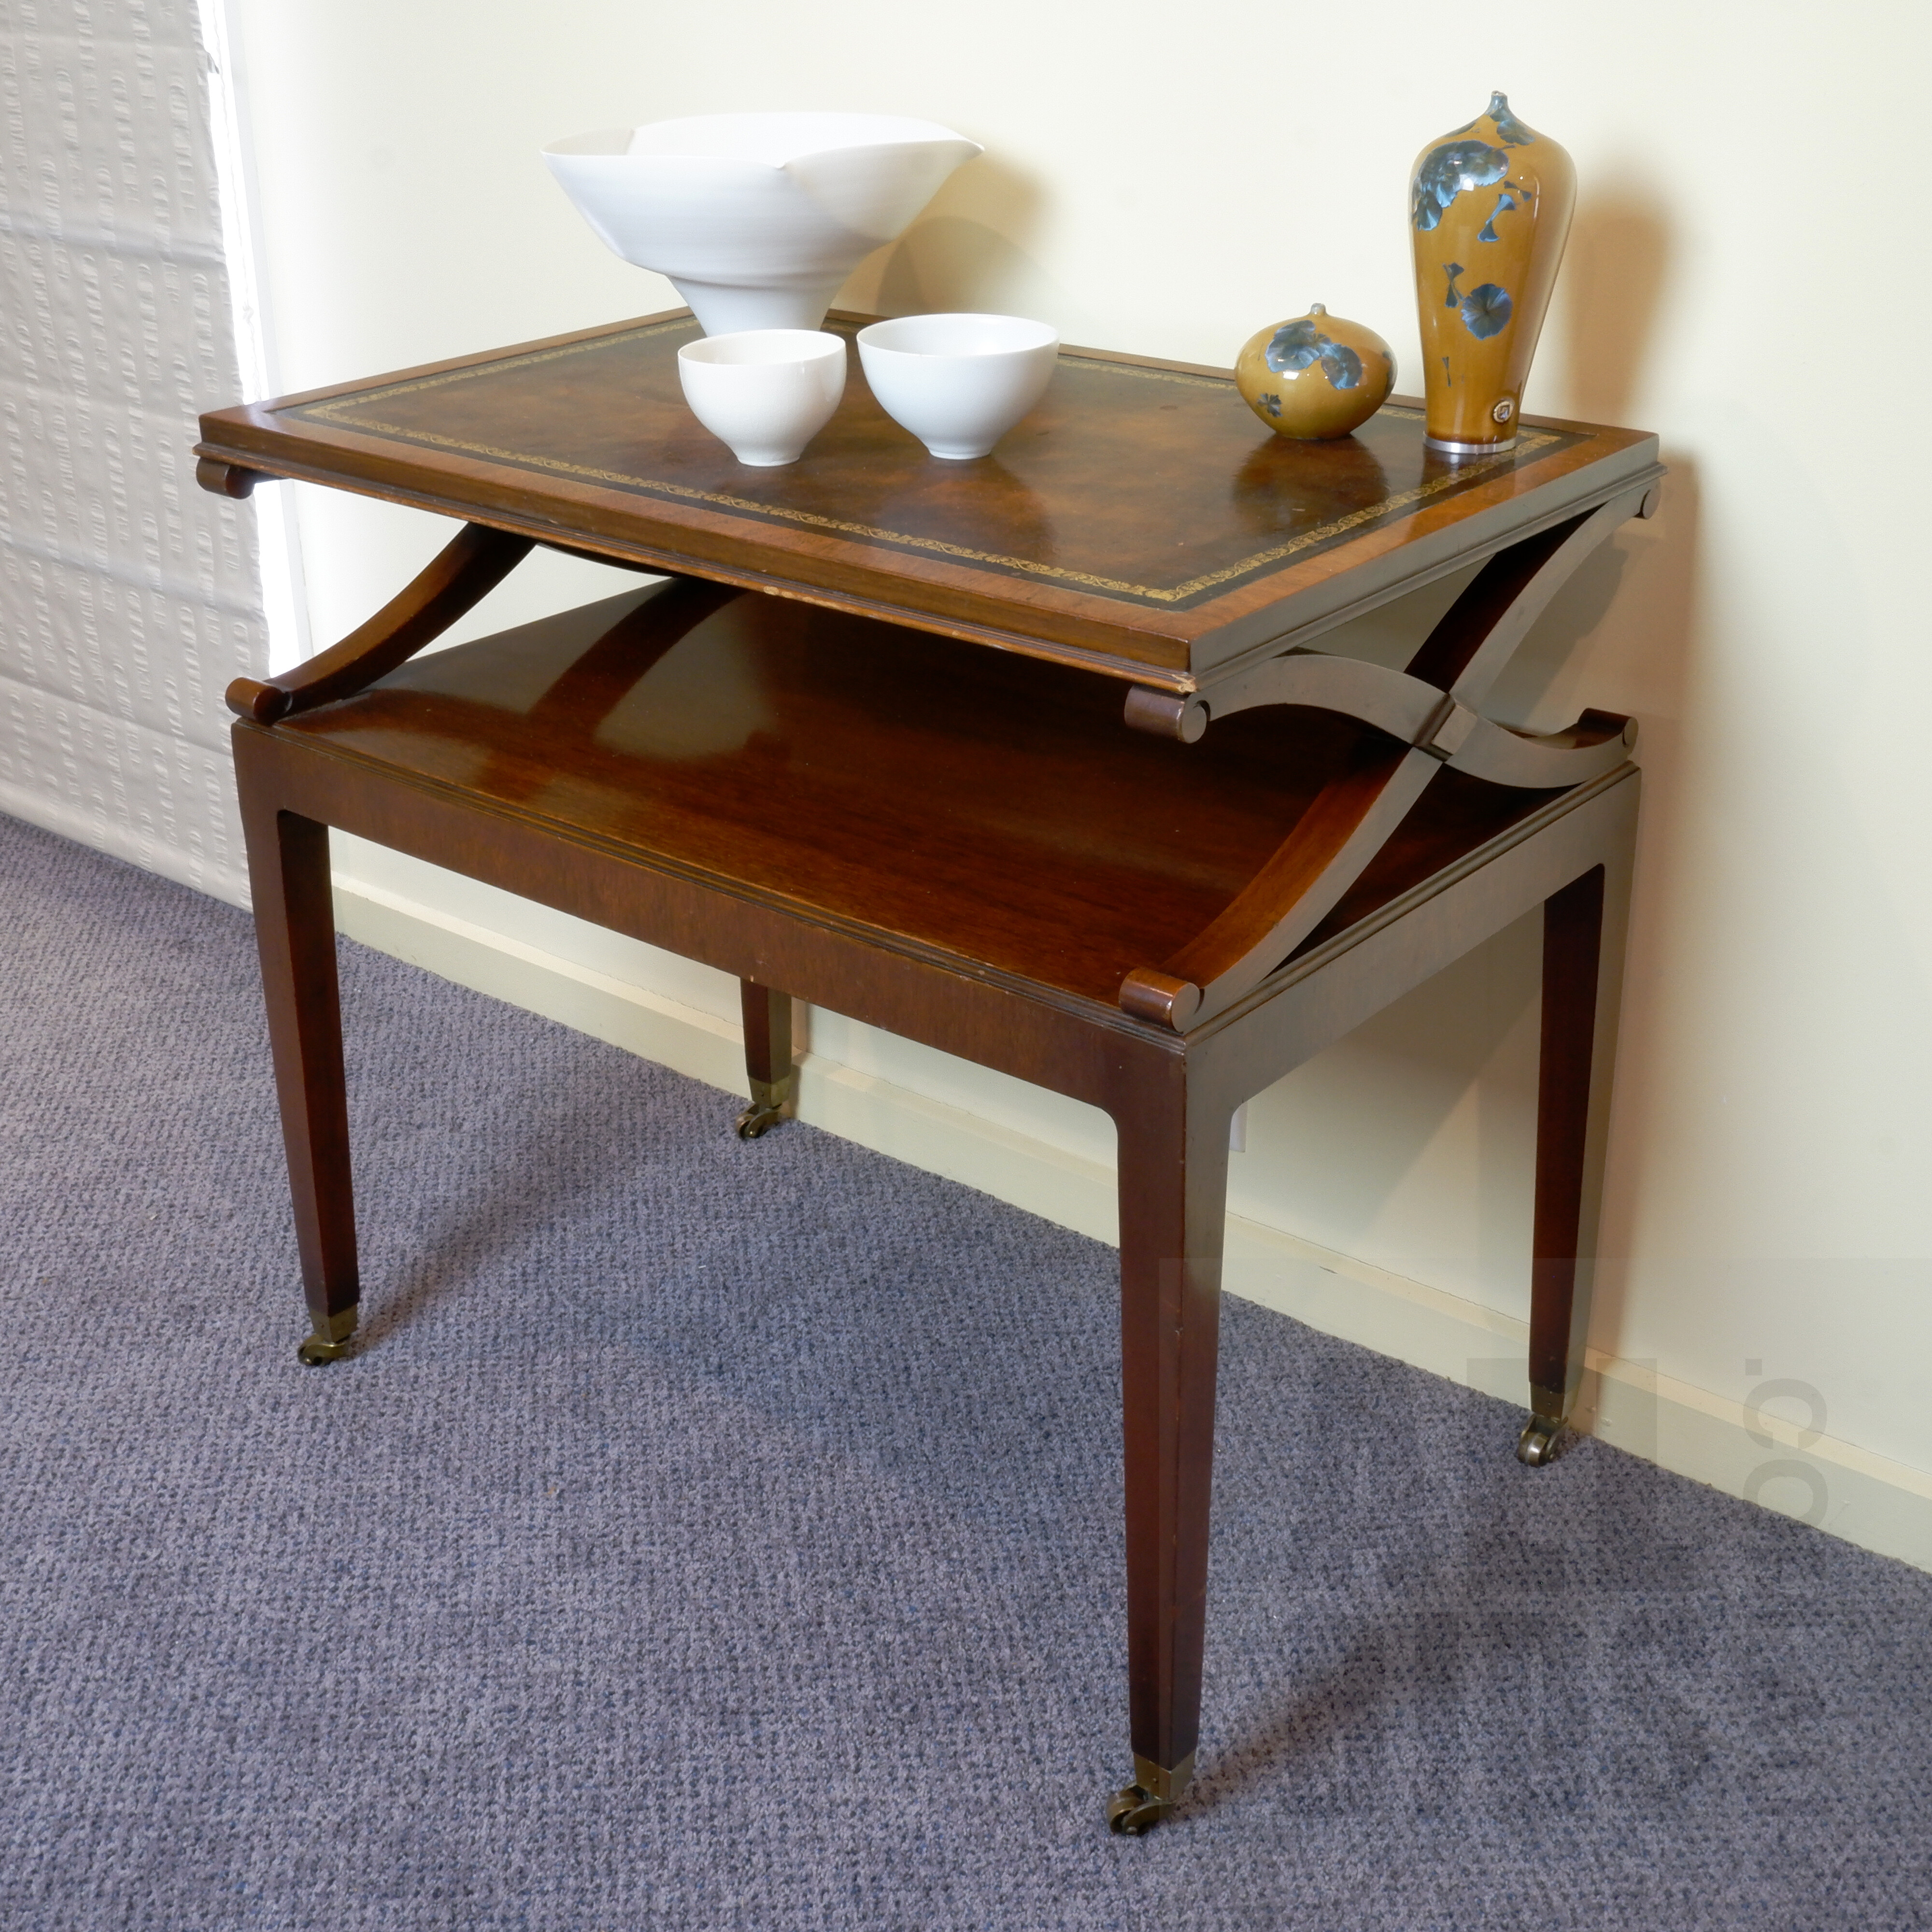 'Mid 20th Century Maple Side Table with Gilt Tooled Leather Top'